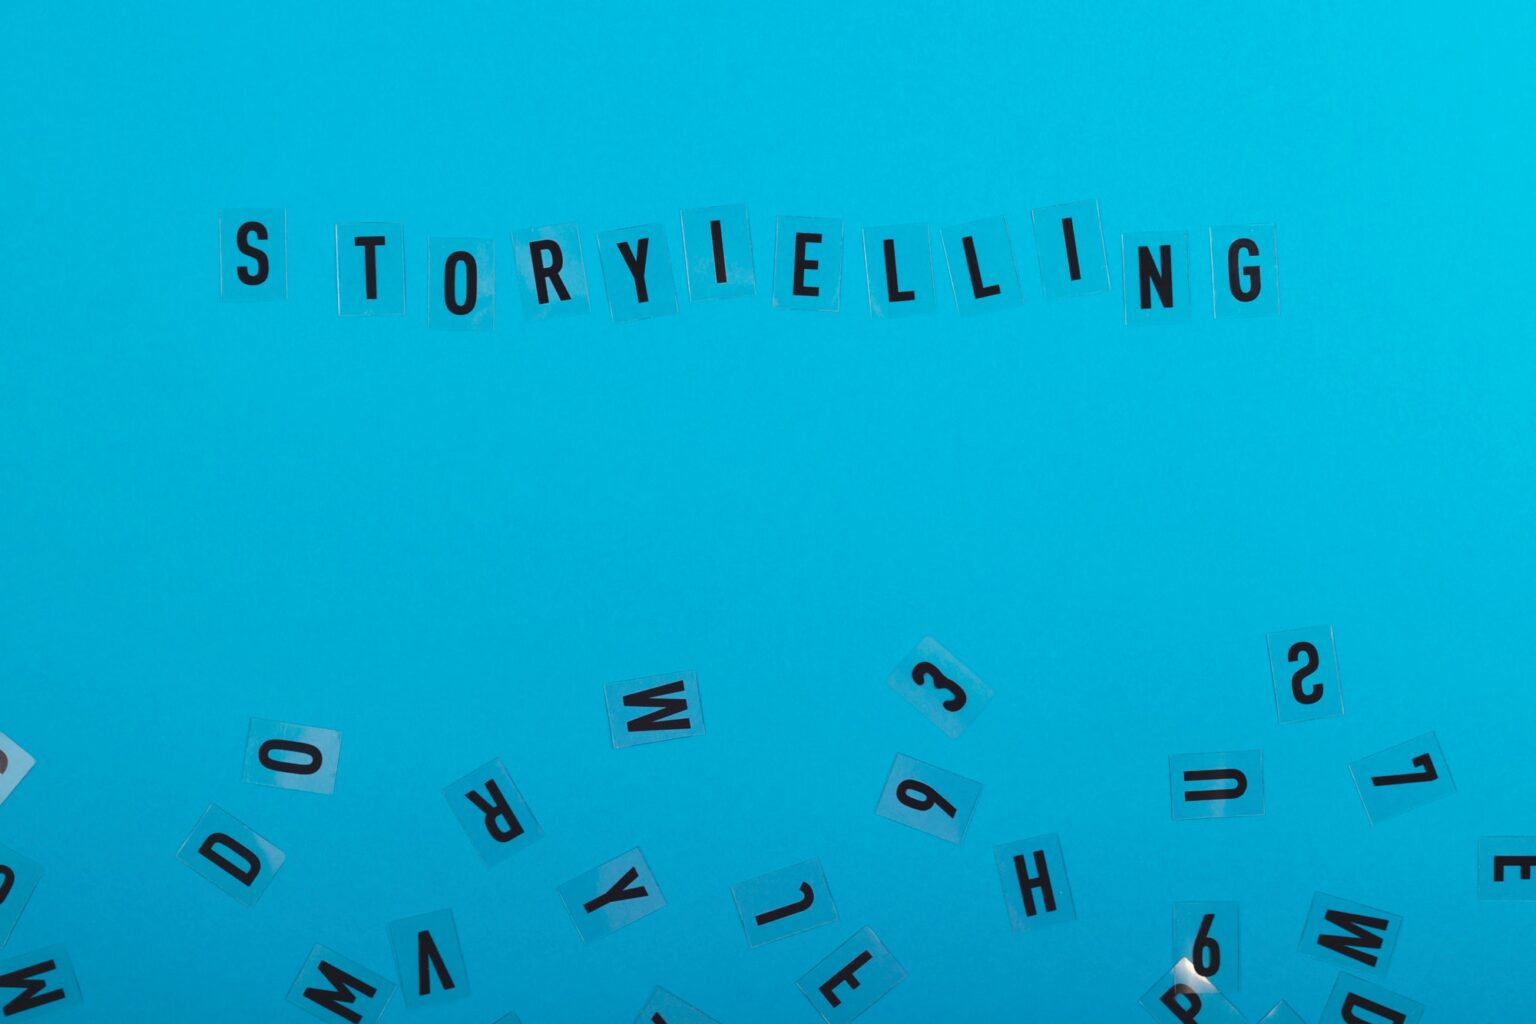 storytelling-is-written-on-a-light-blue-background-among-black-letters-marketing-and-content.jpg